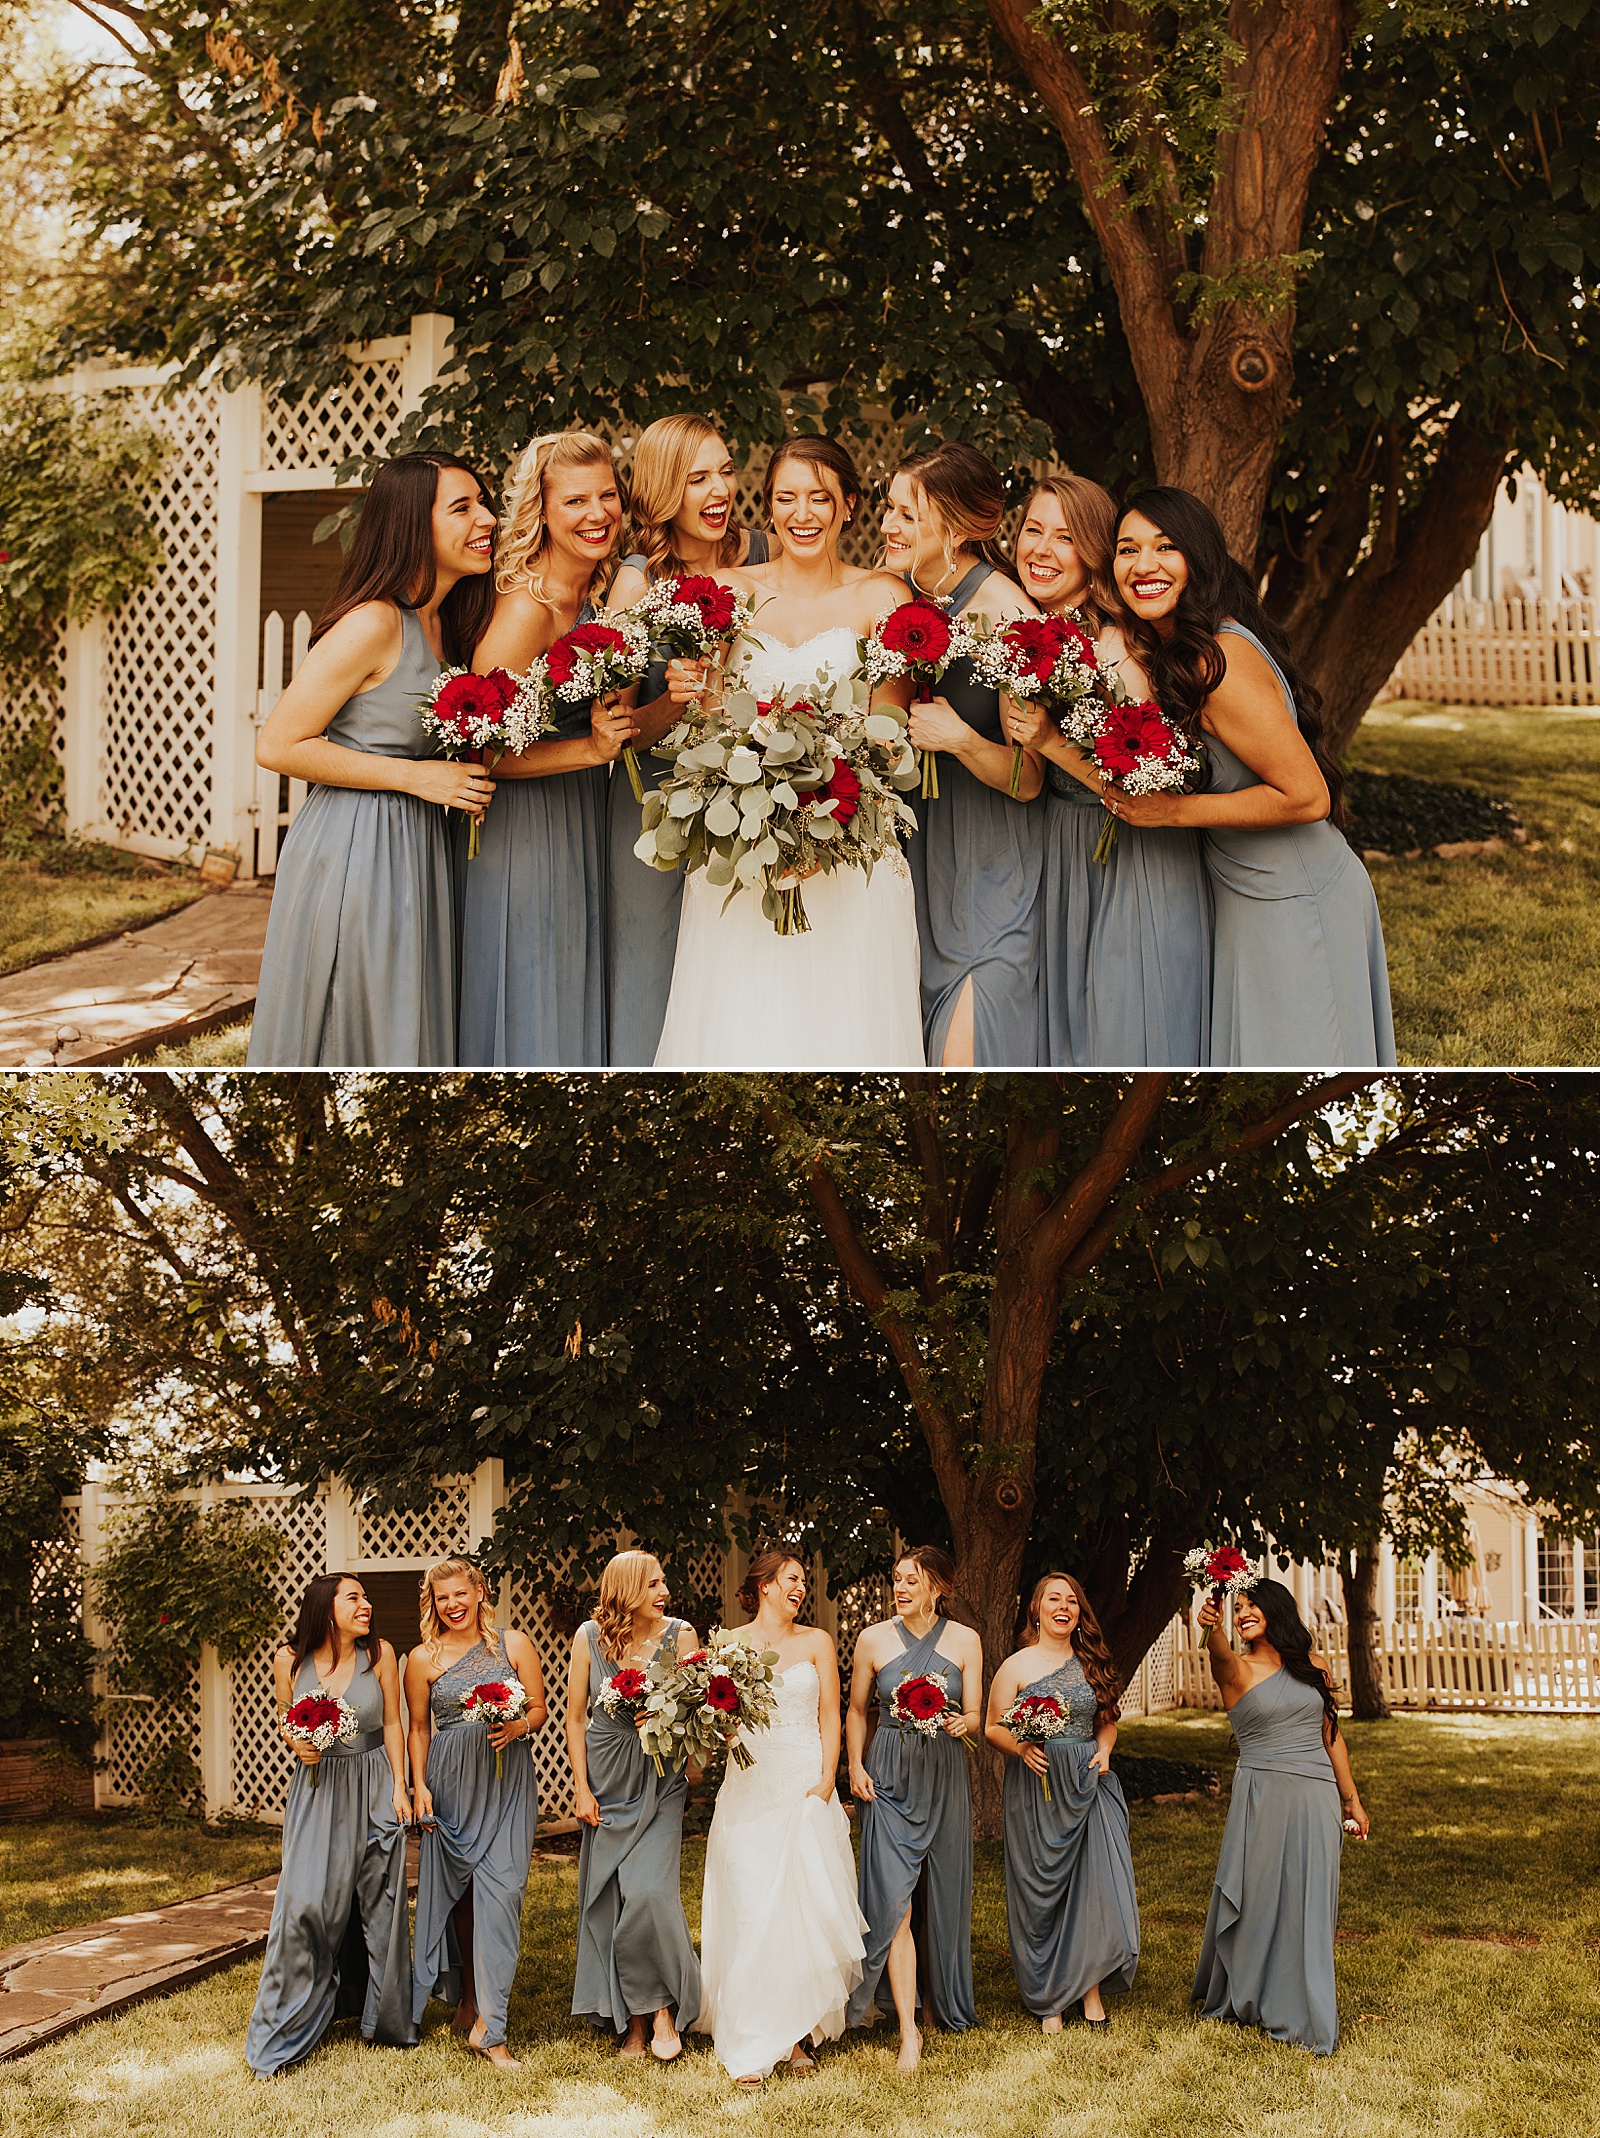 A bridemaids photo at Country Home Weddings in Canyon, TX.